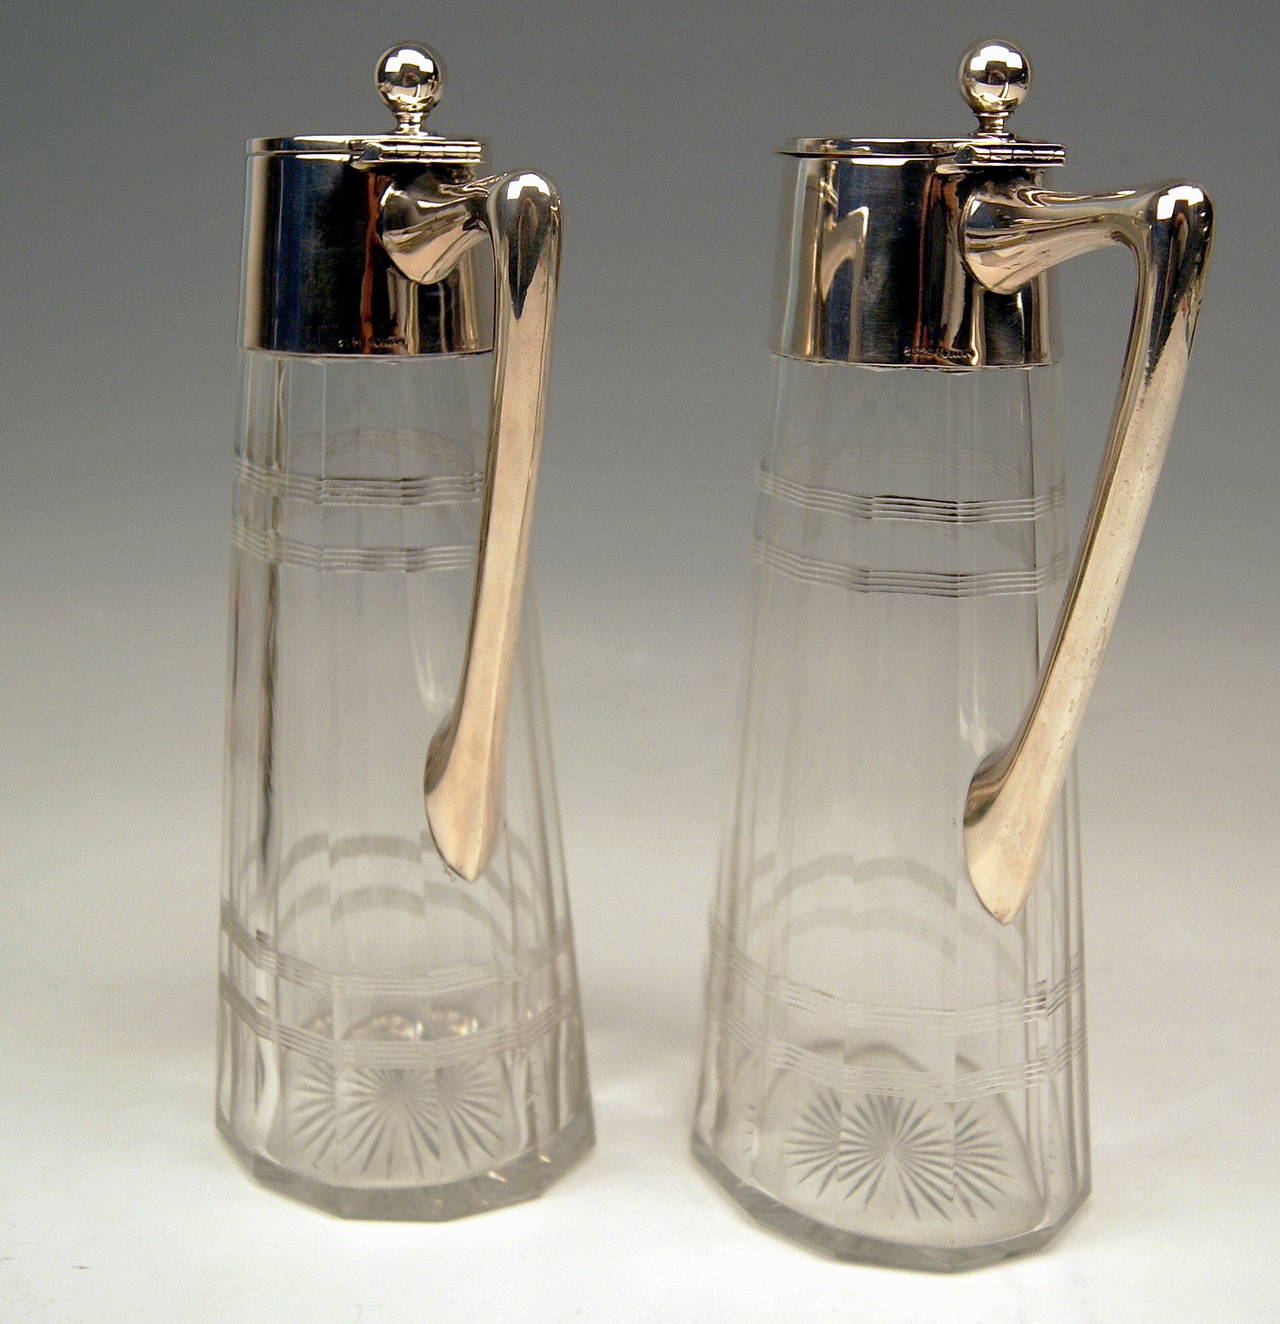 A Pair of Glass Decanters  (Carafes)  with Silver Mountings 
ART NOUVEAU  
MARK WTB: GERMANY / Schwaebisch Gmuend, manufactory Wilhelm Binder, number 8329         Letters  'VIETOR'  ( = probably master having produced these glass decanters